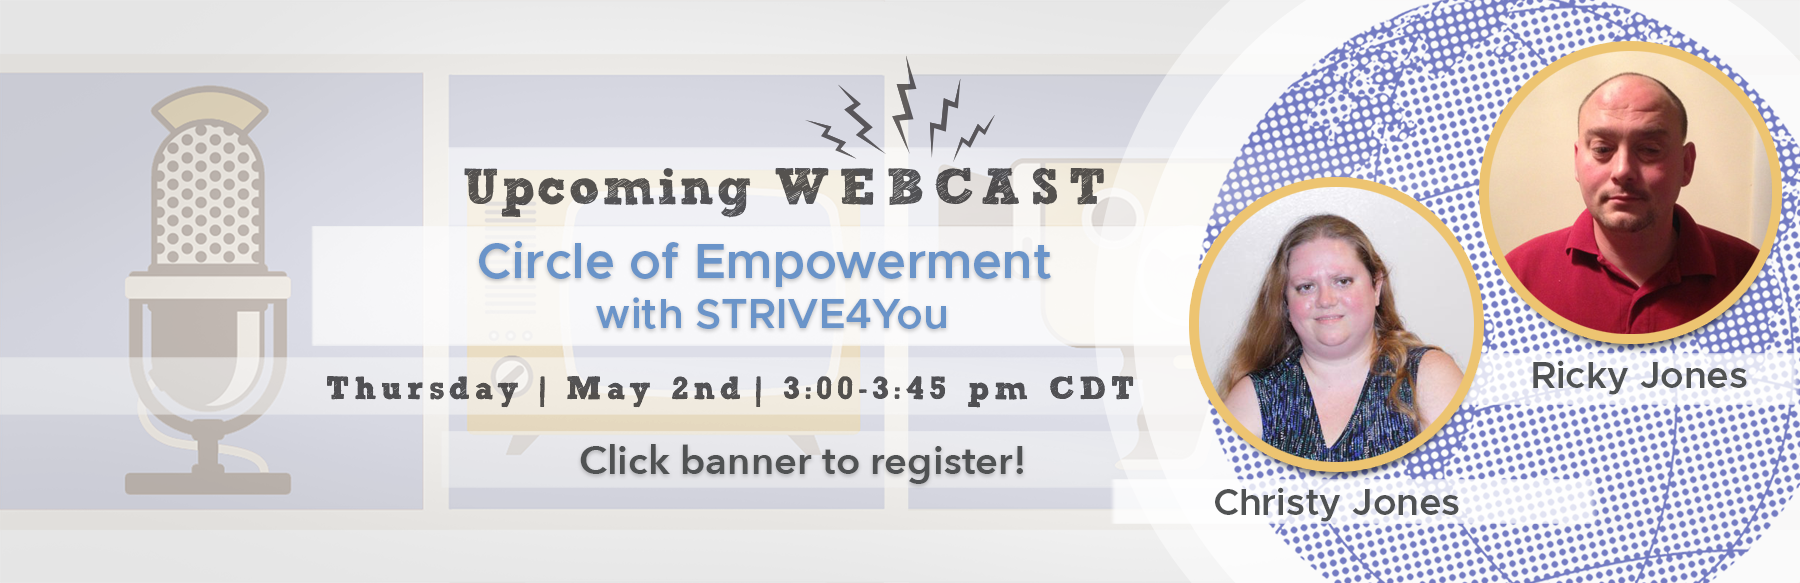 Circle of Empowerment with STRIVE4You Webcast banner